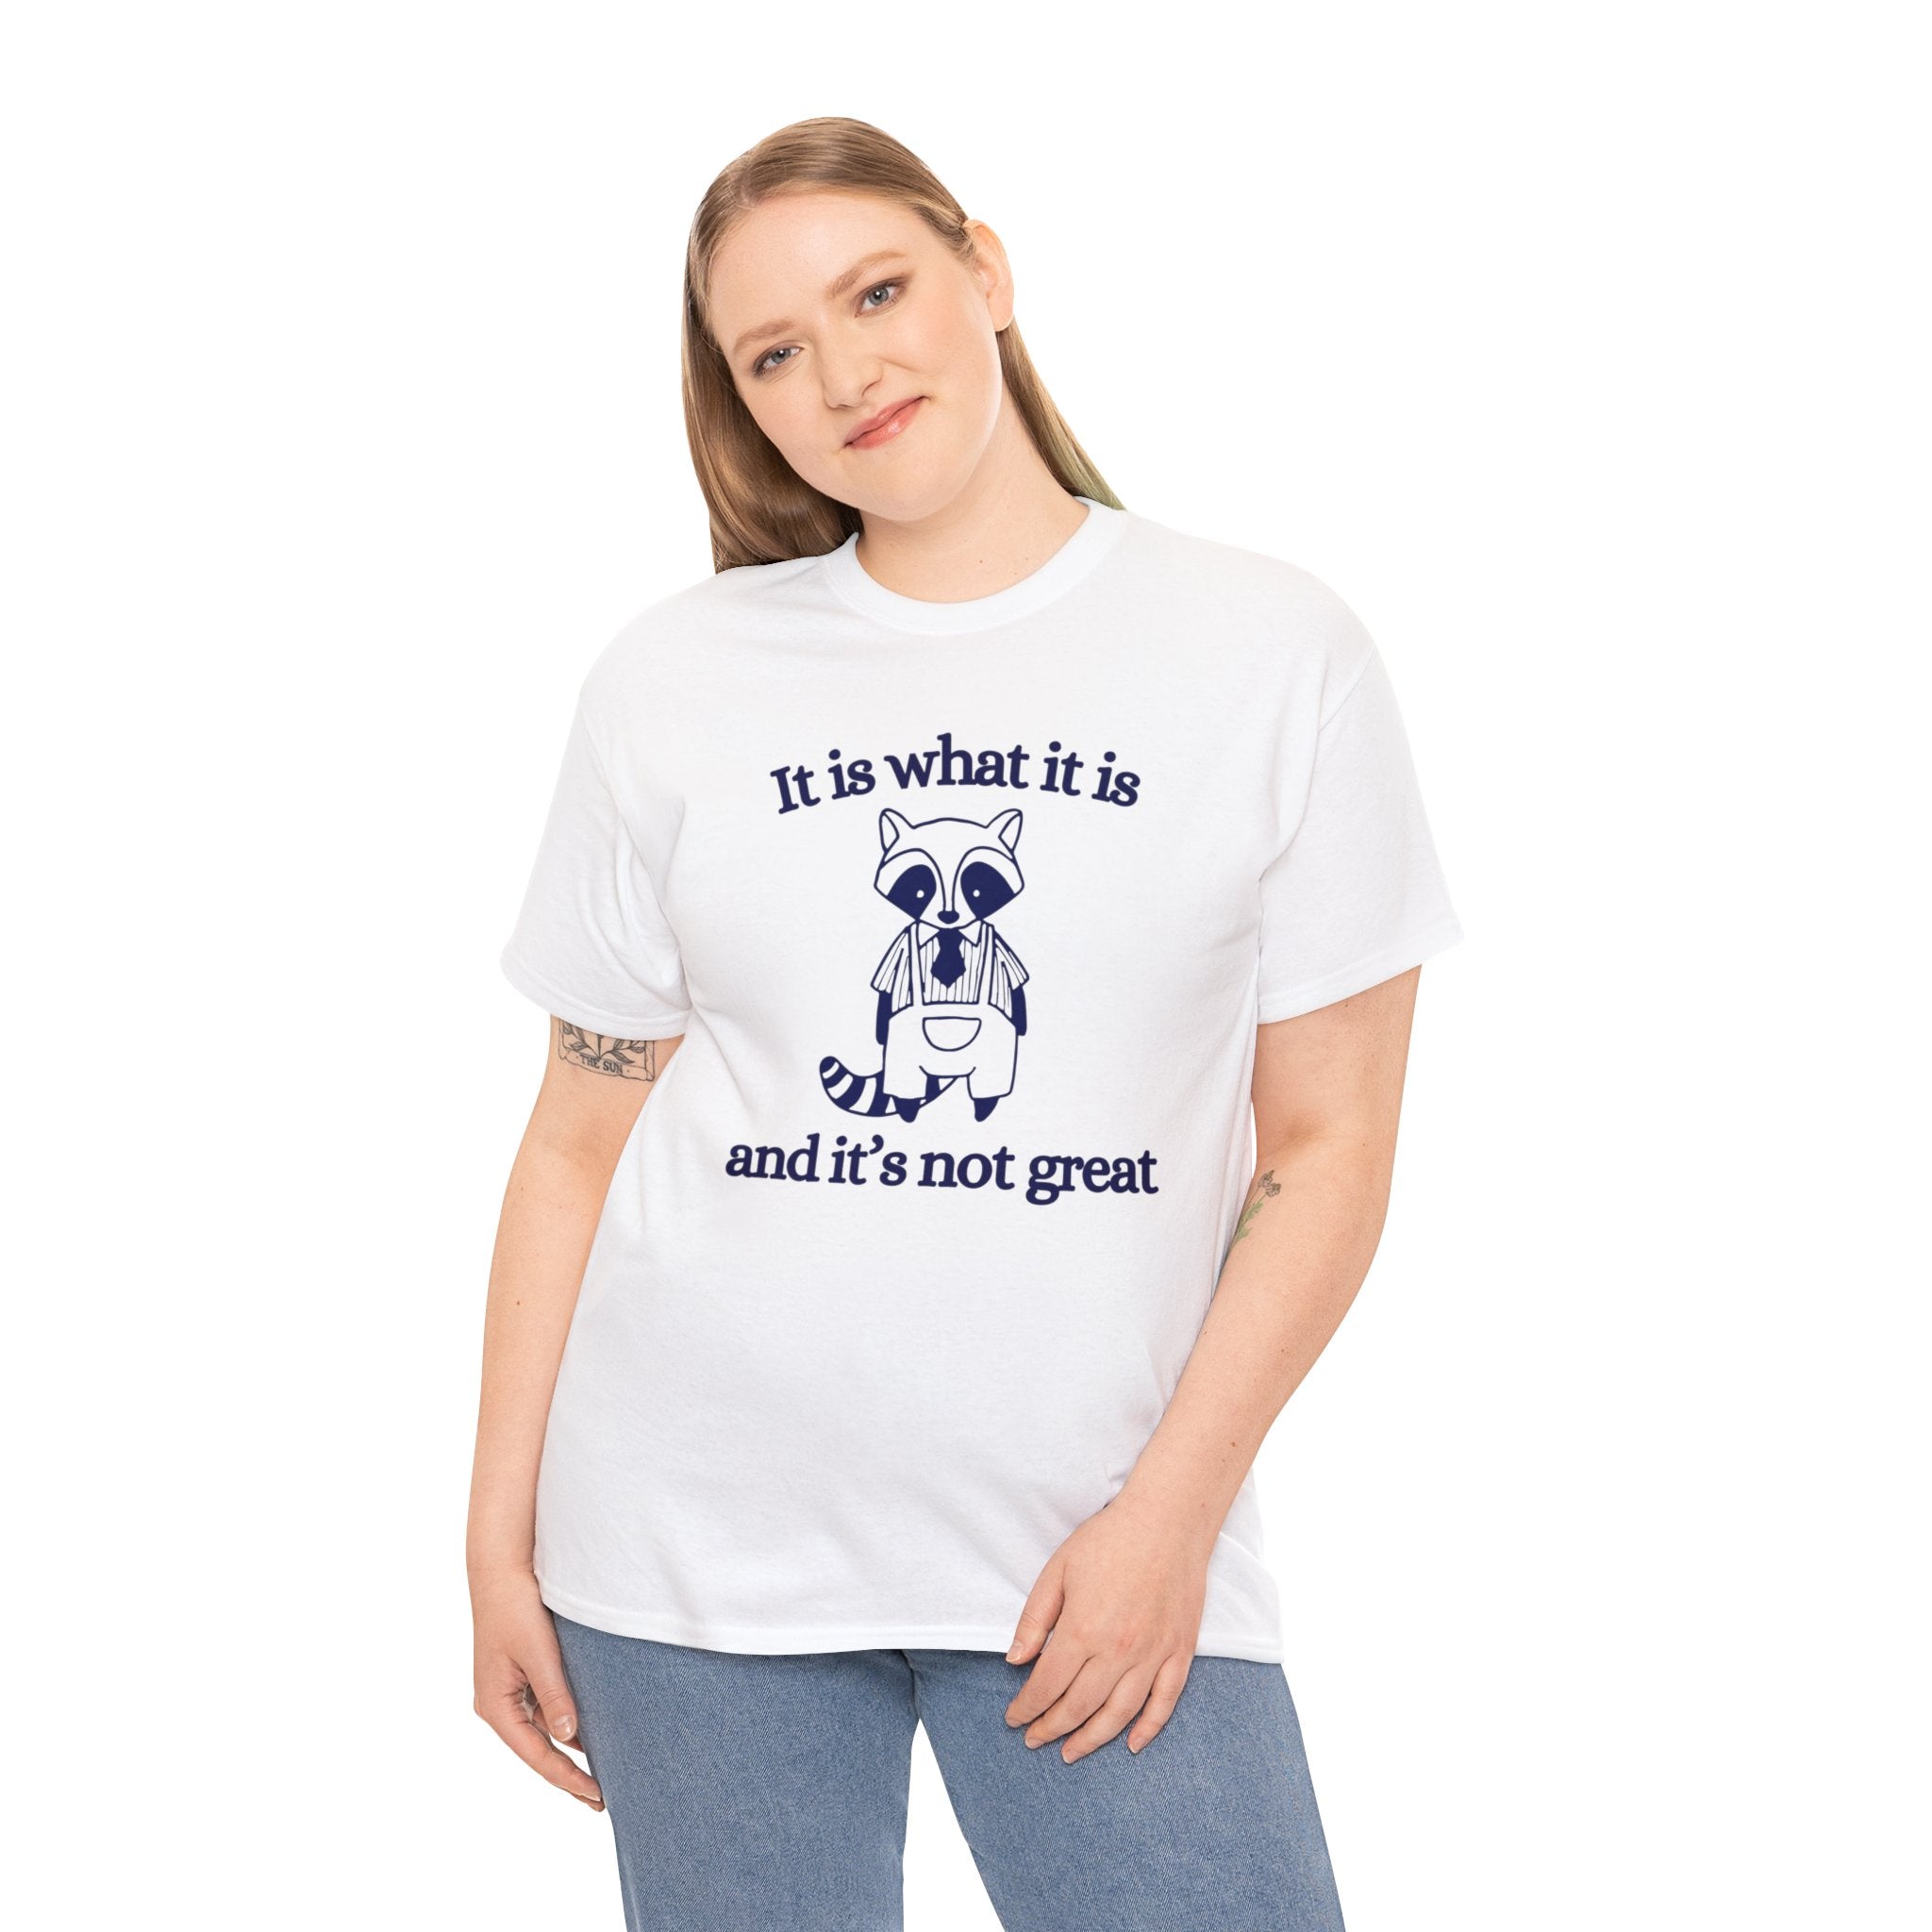 It is what it is and its not great | graphic tee | funny shirt | vintage shirt | sarcastic t-shirt retro cartoon tee